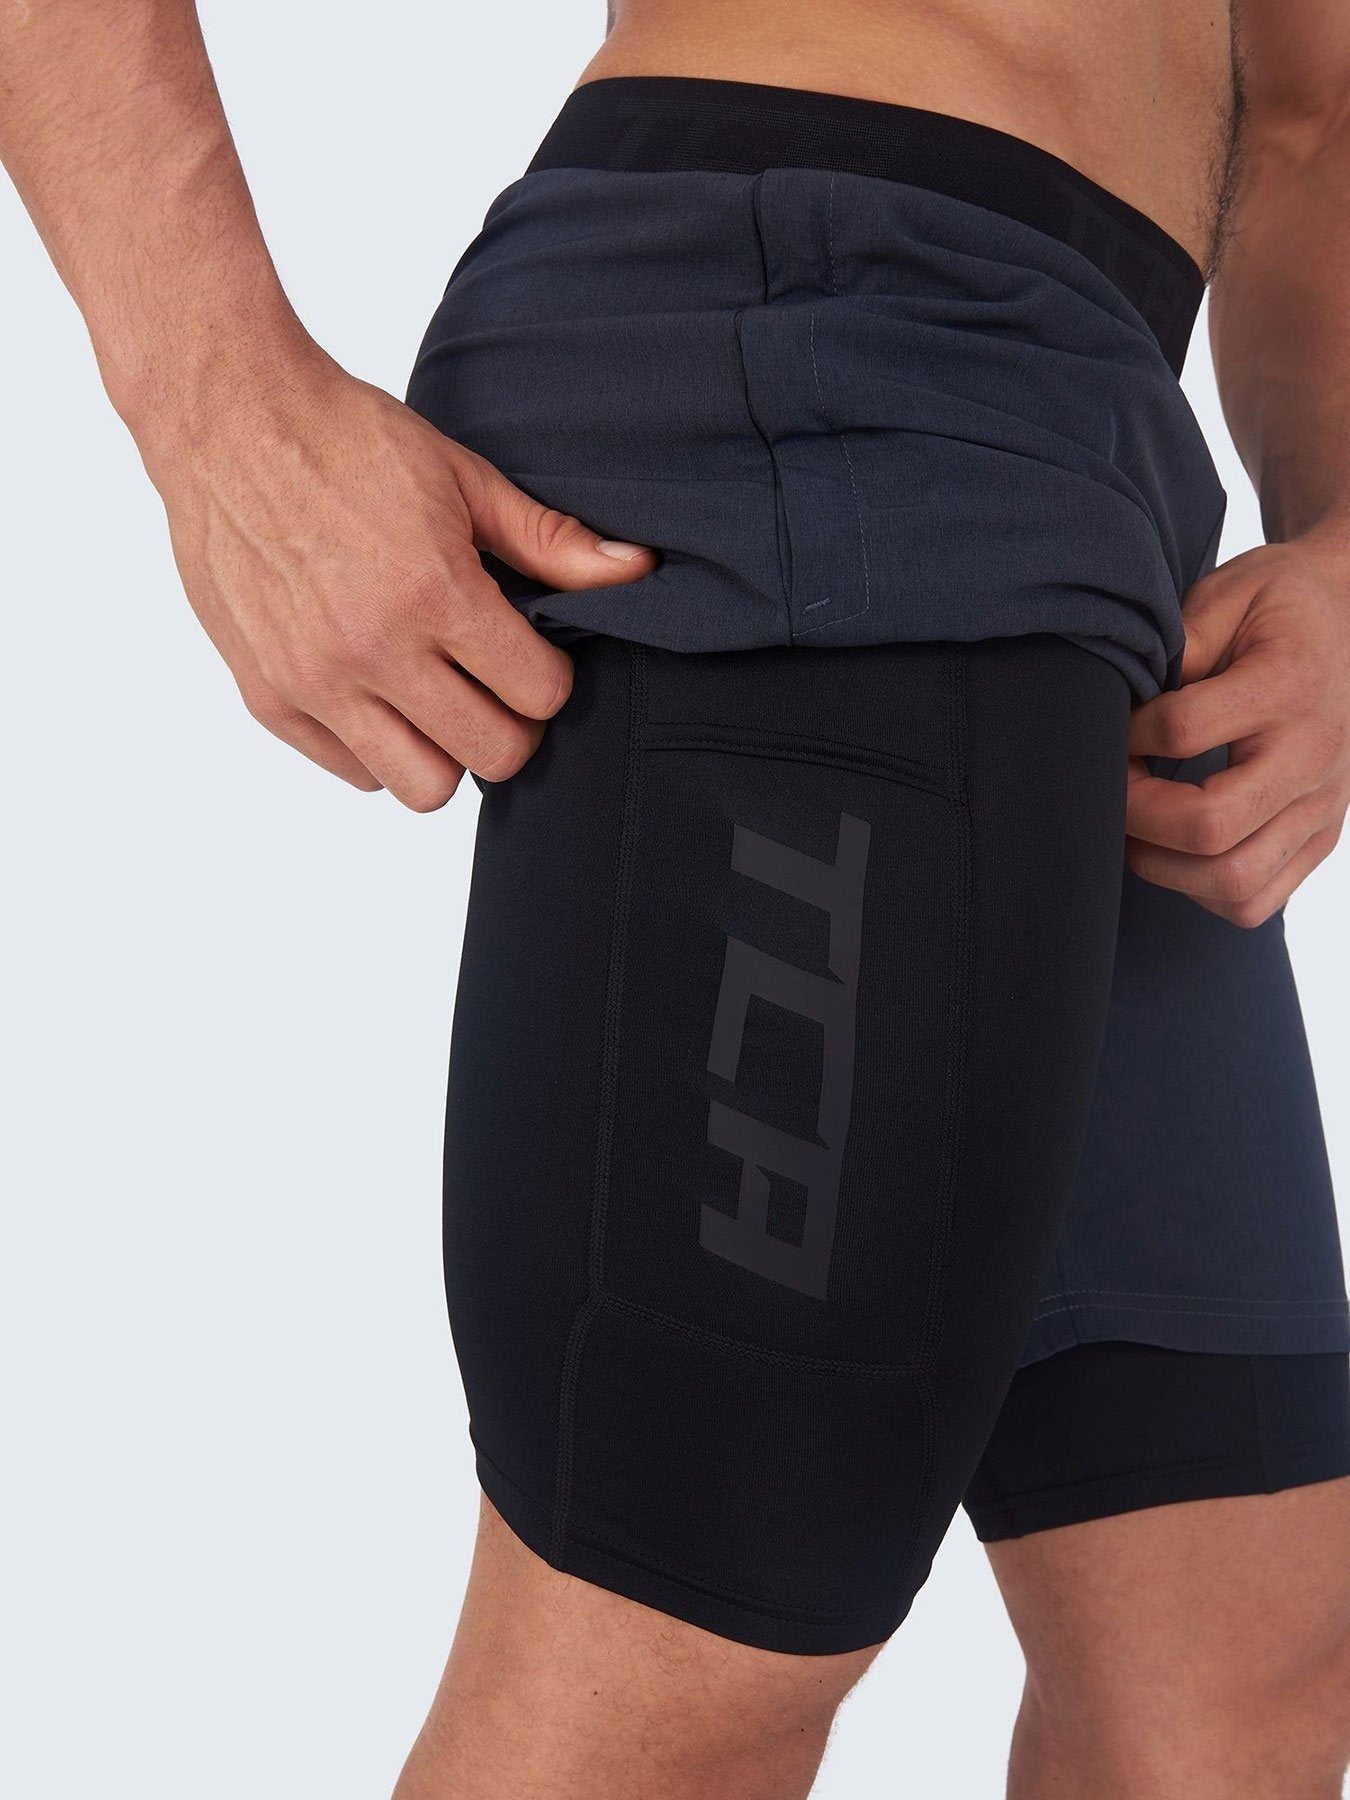 Utility 2-in-1 Running Short For Men With Side Zip Pockets, Internal Compression Lining With Pocket & Elastic Waistband